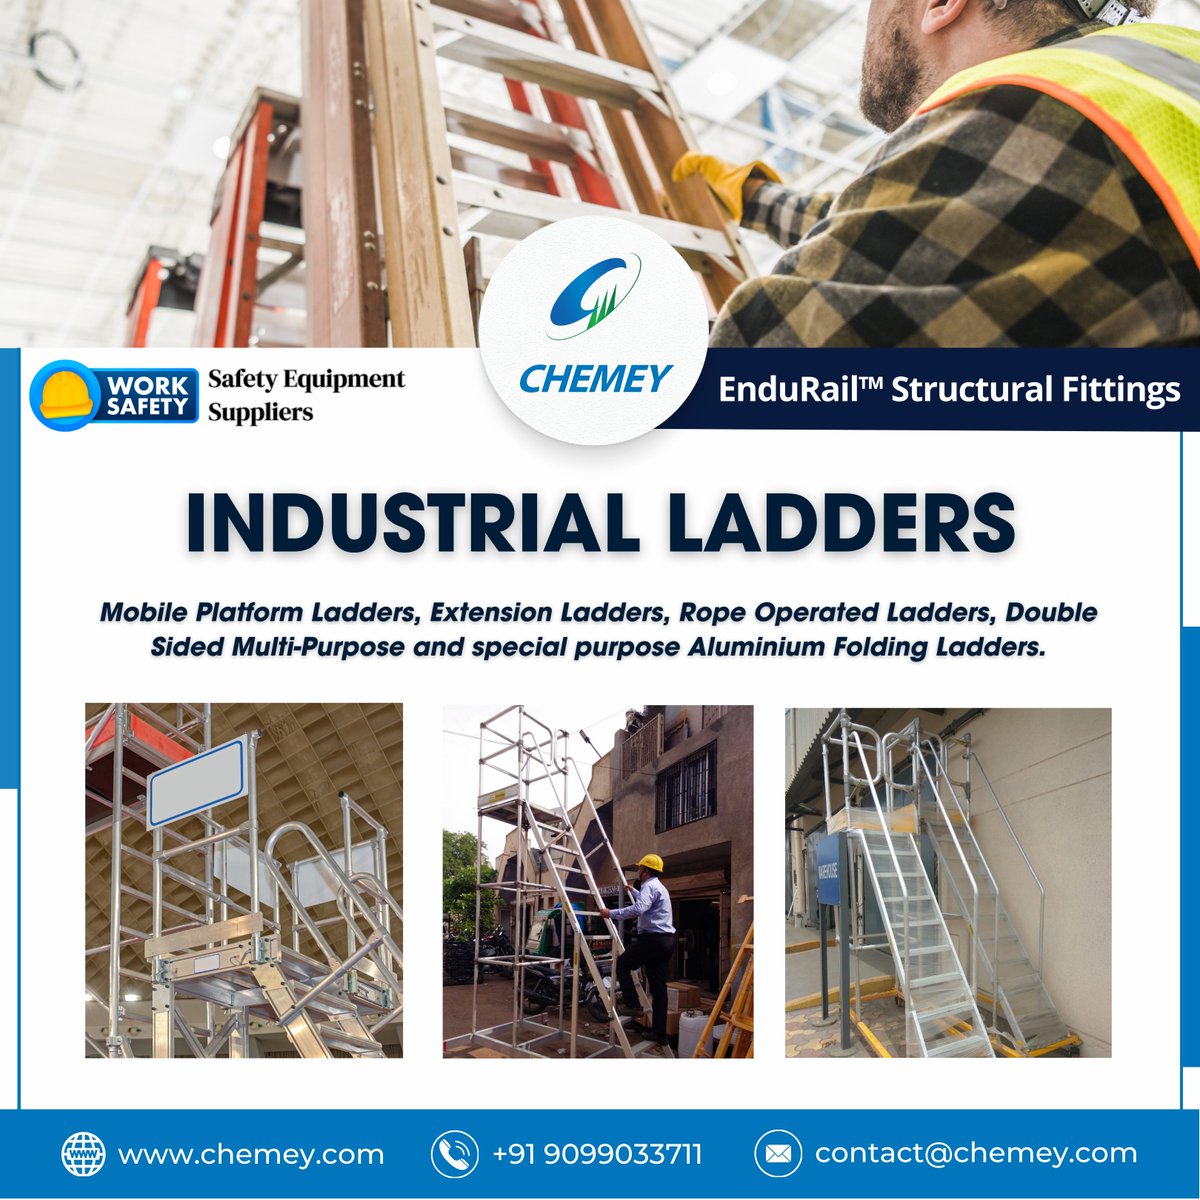 Stay safe and reach new heights with our #IndustrialLadders!

Reach new #heightssafely! Explore our industrial #AluminumLadders today. 

🔗 chemey.com/industrial-lad…
📞 +91 9099033711
✉️ contact@chemey.com

#Chemey  #Ladders #PlatformLadders #ExtensionLadders #FoldingLadders